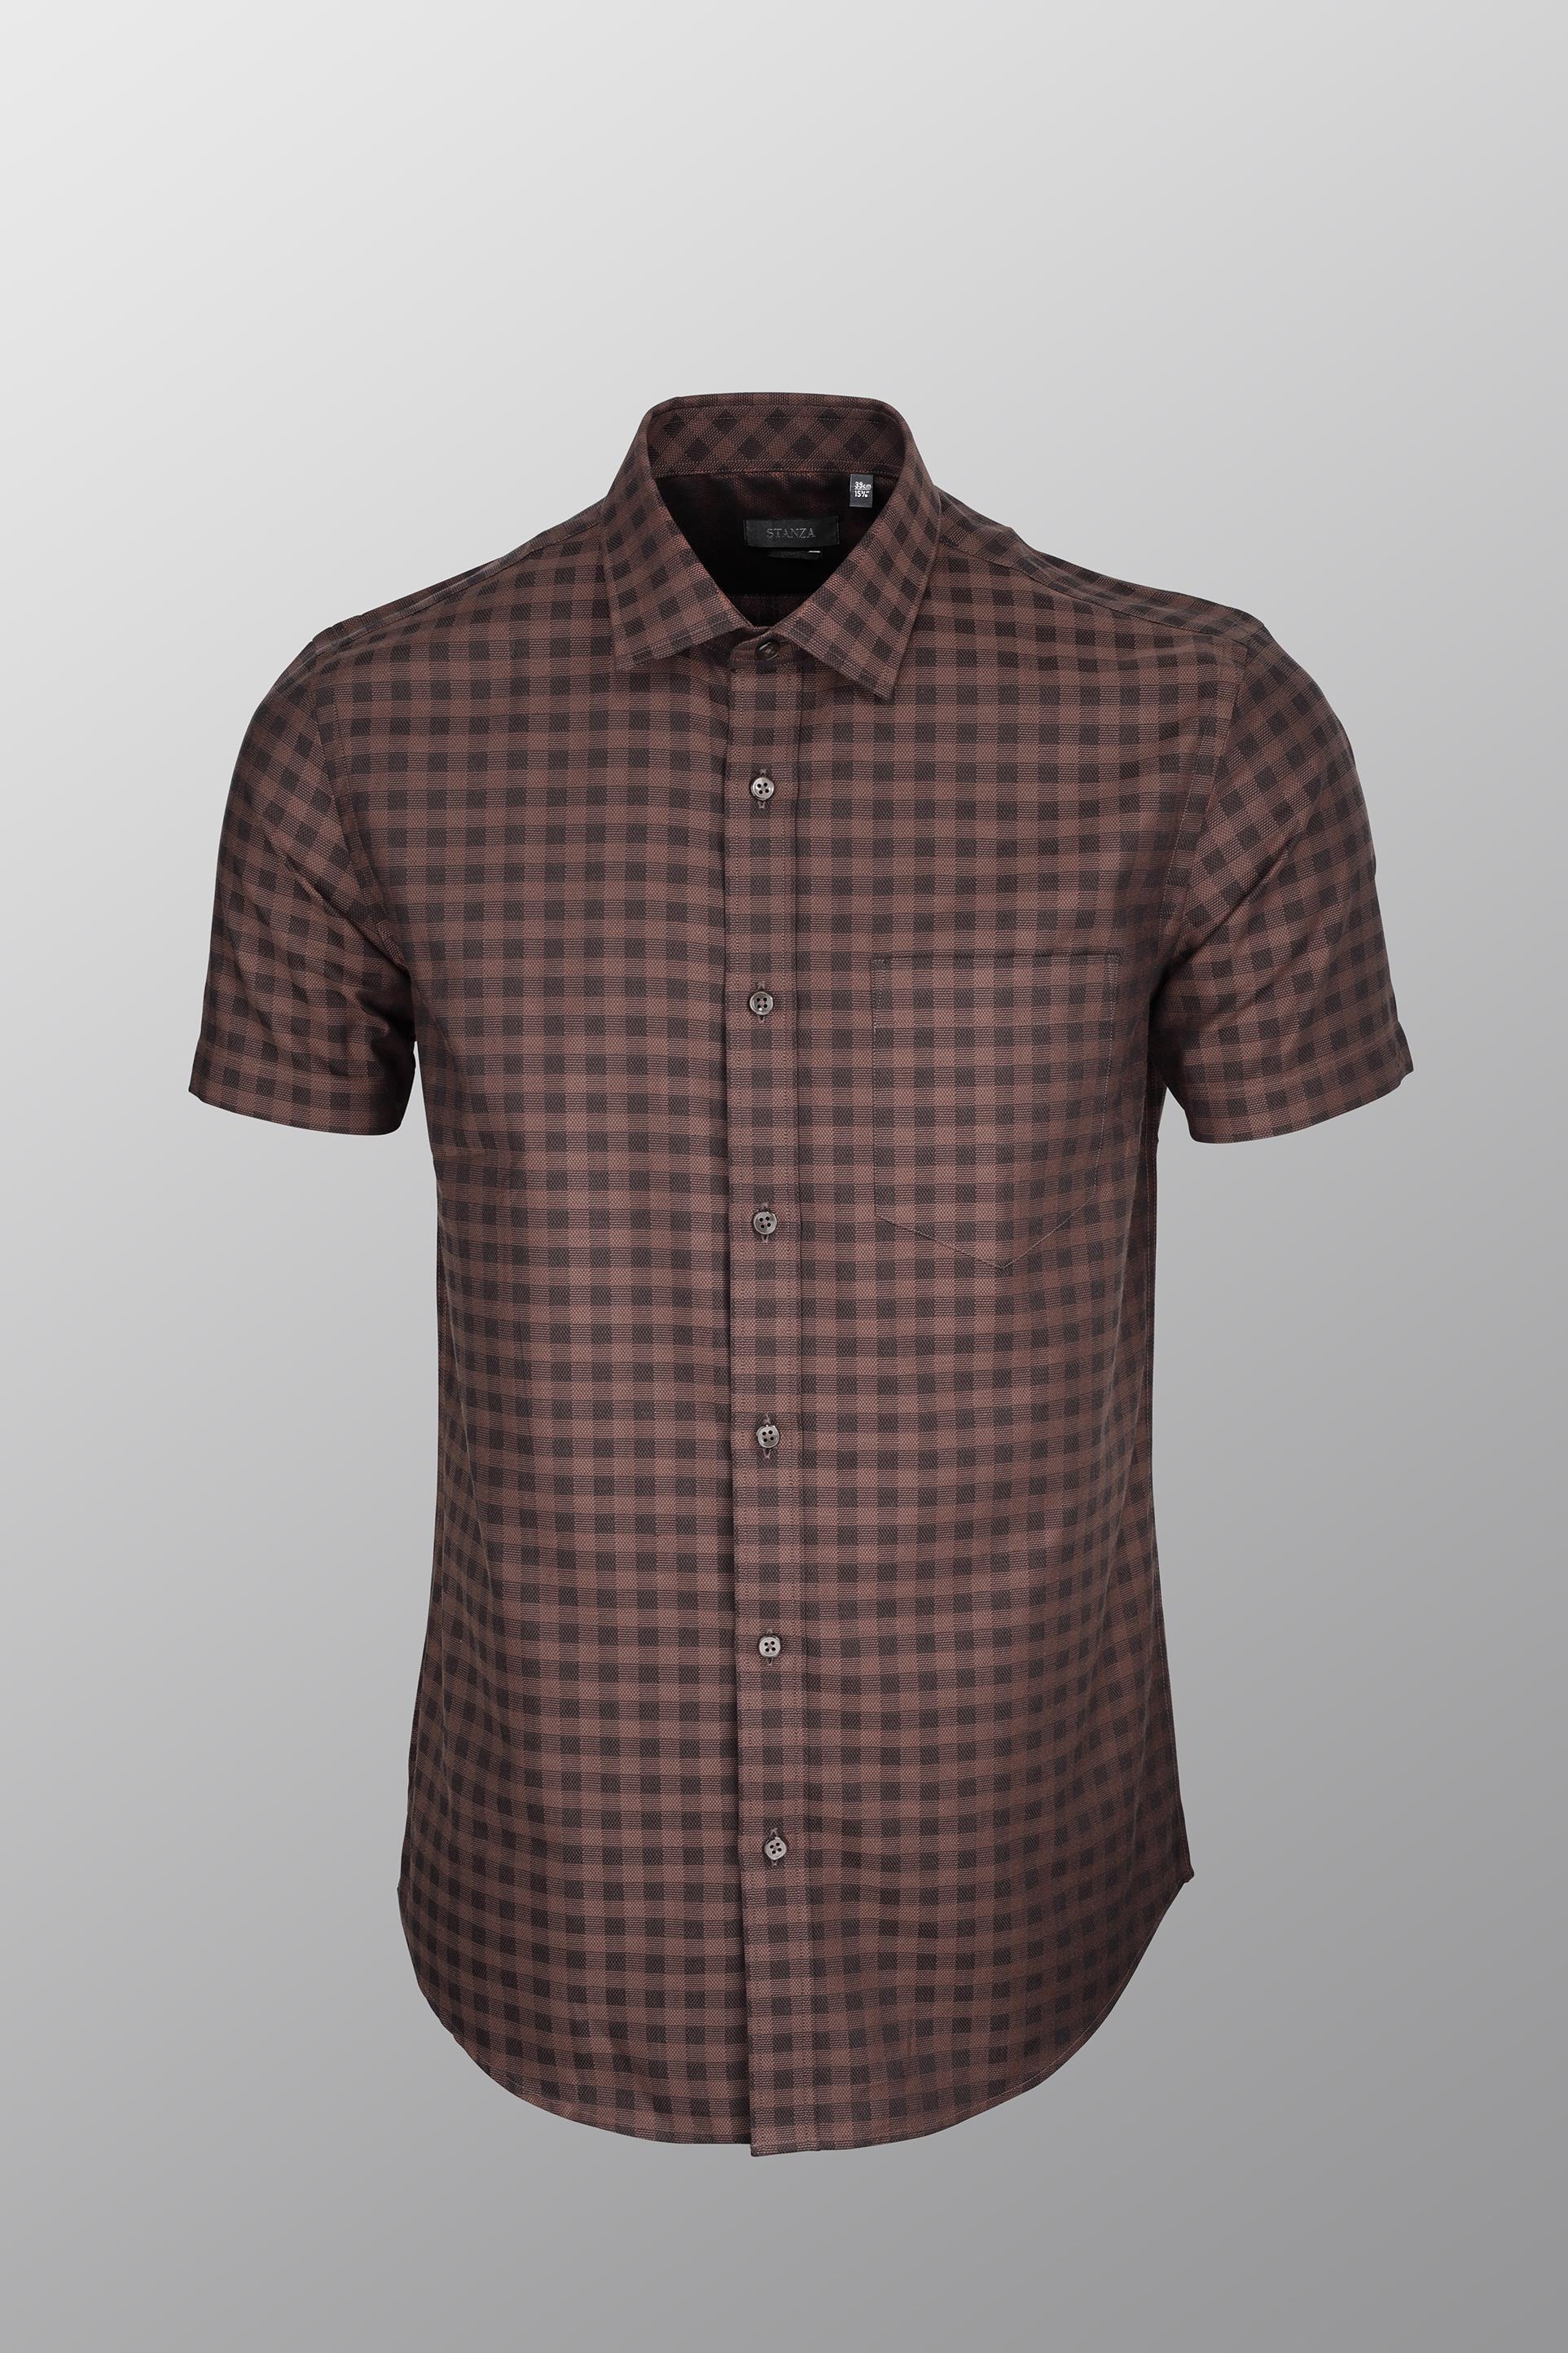 brown swirled checkered wallpaper Essential T-Shirt for Sale by itsmevilma